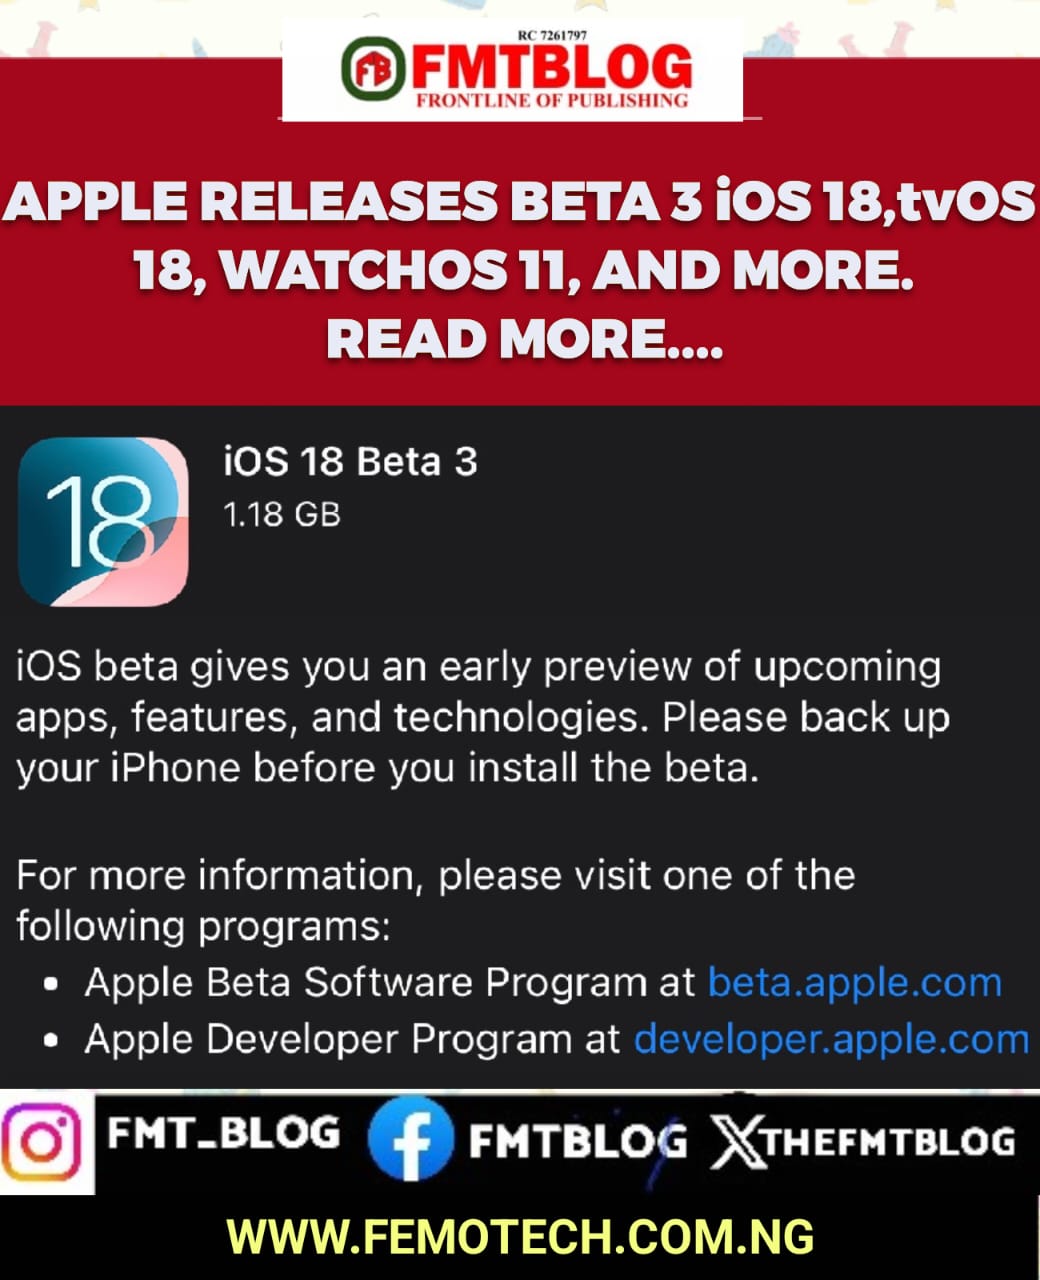 Apple Releases Beta 3 iOS 18, tvOS 18, WatchOS 11, And More…